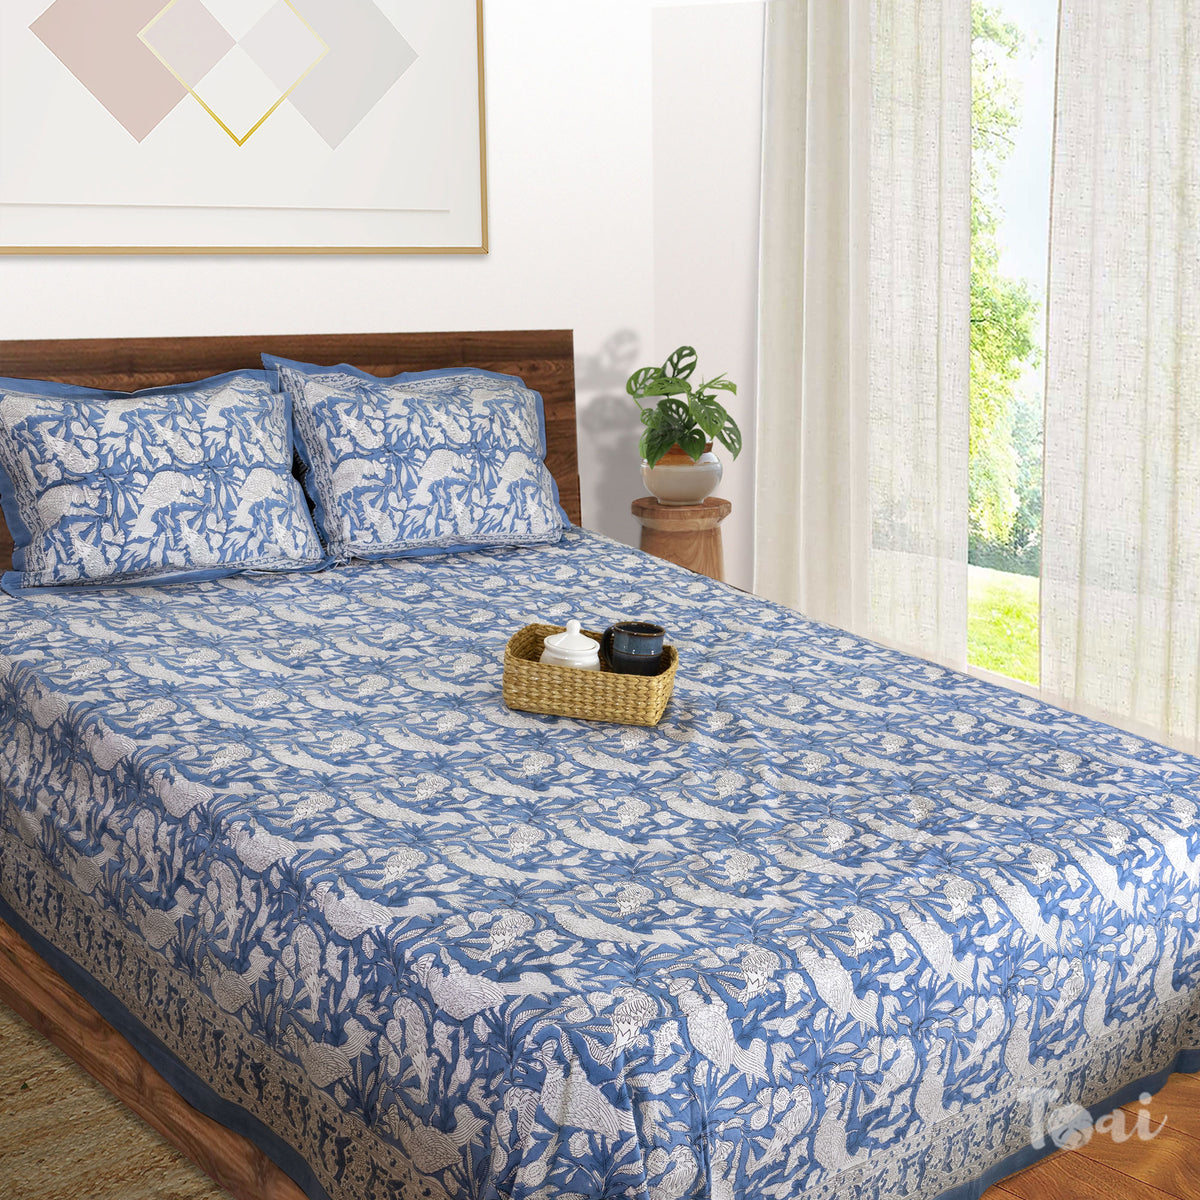 Blue Birds and White |hand block printed bedsheet| Double bed: Queen size, King Size | 300 TC Premium Pure Cotton| Complementing pillow covers